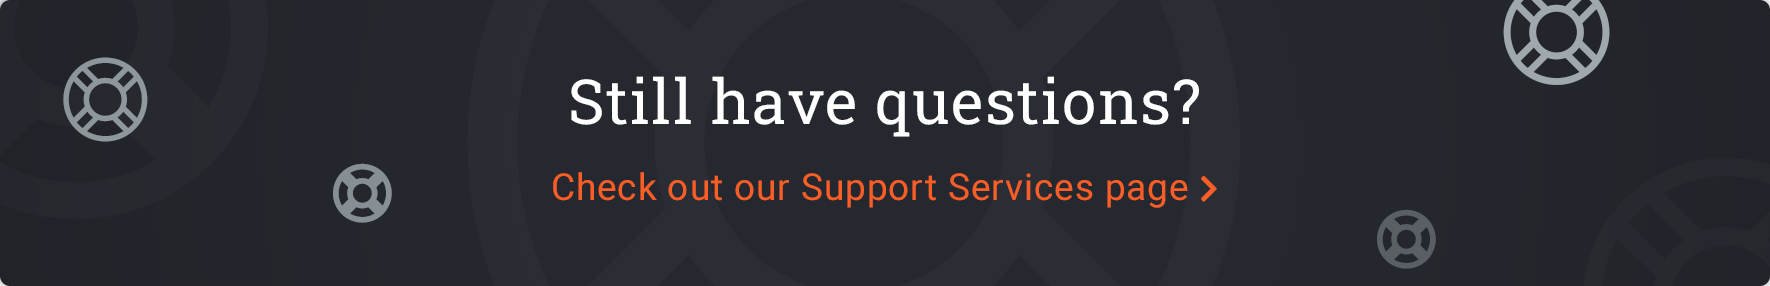 Still have questions? Check out our Support Services page | Acro Media